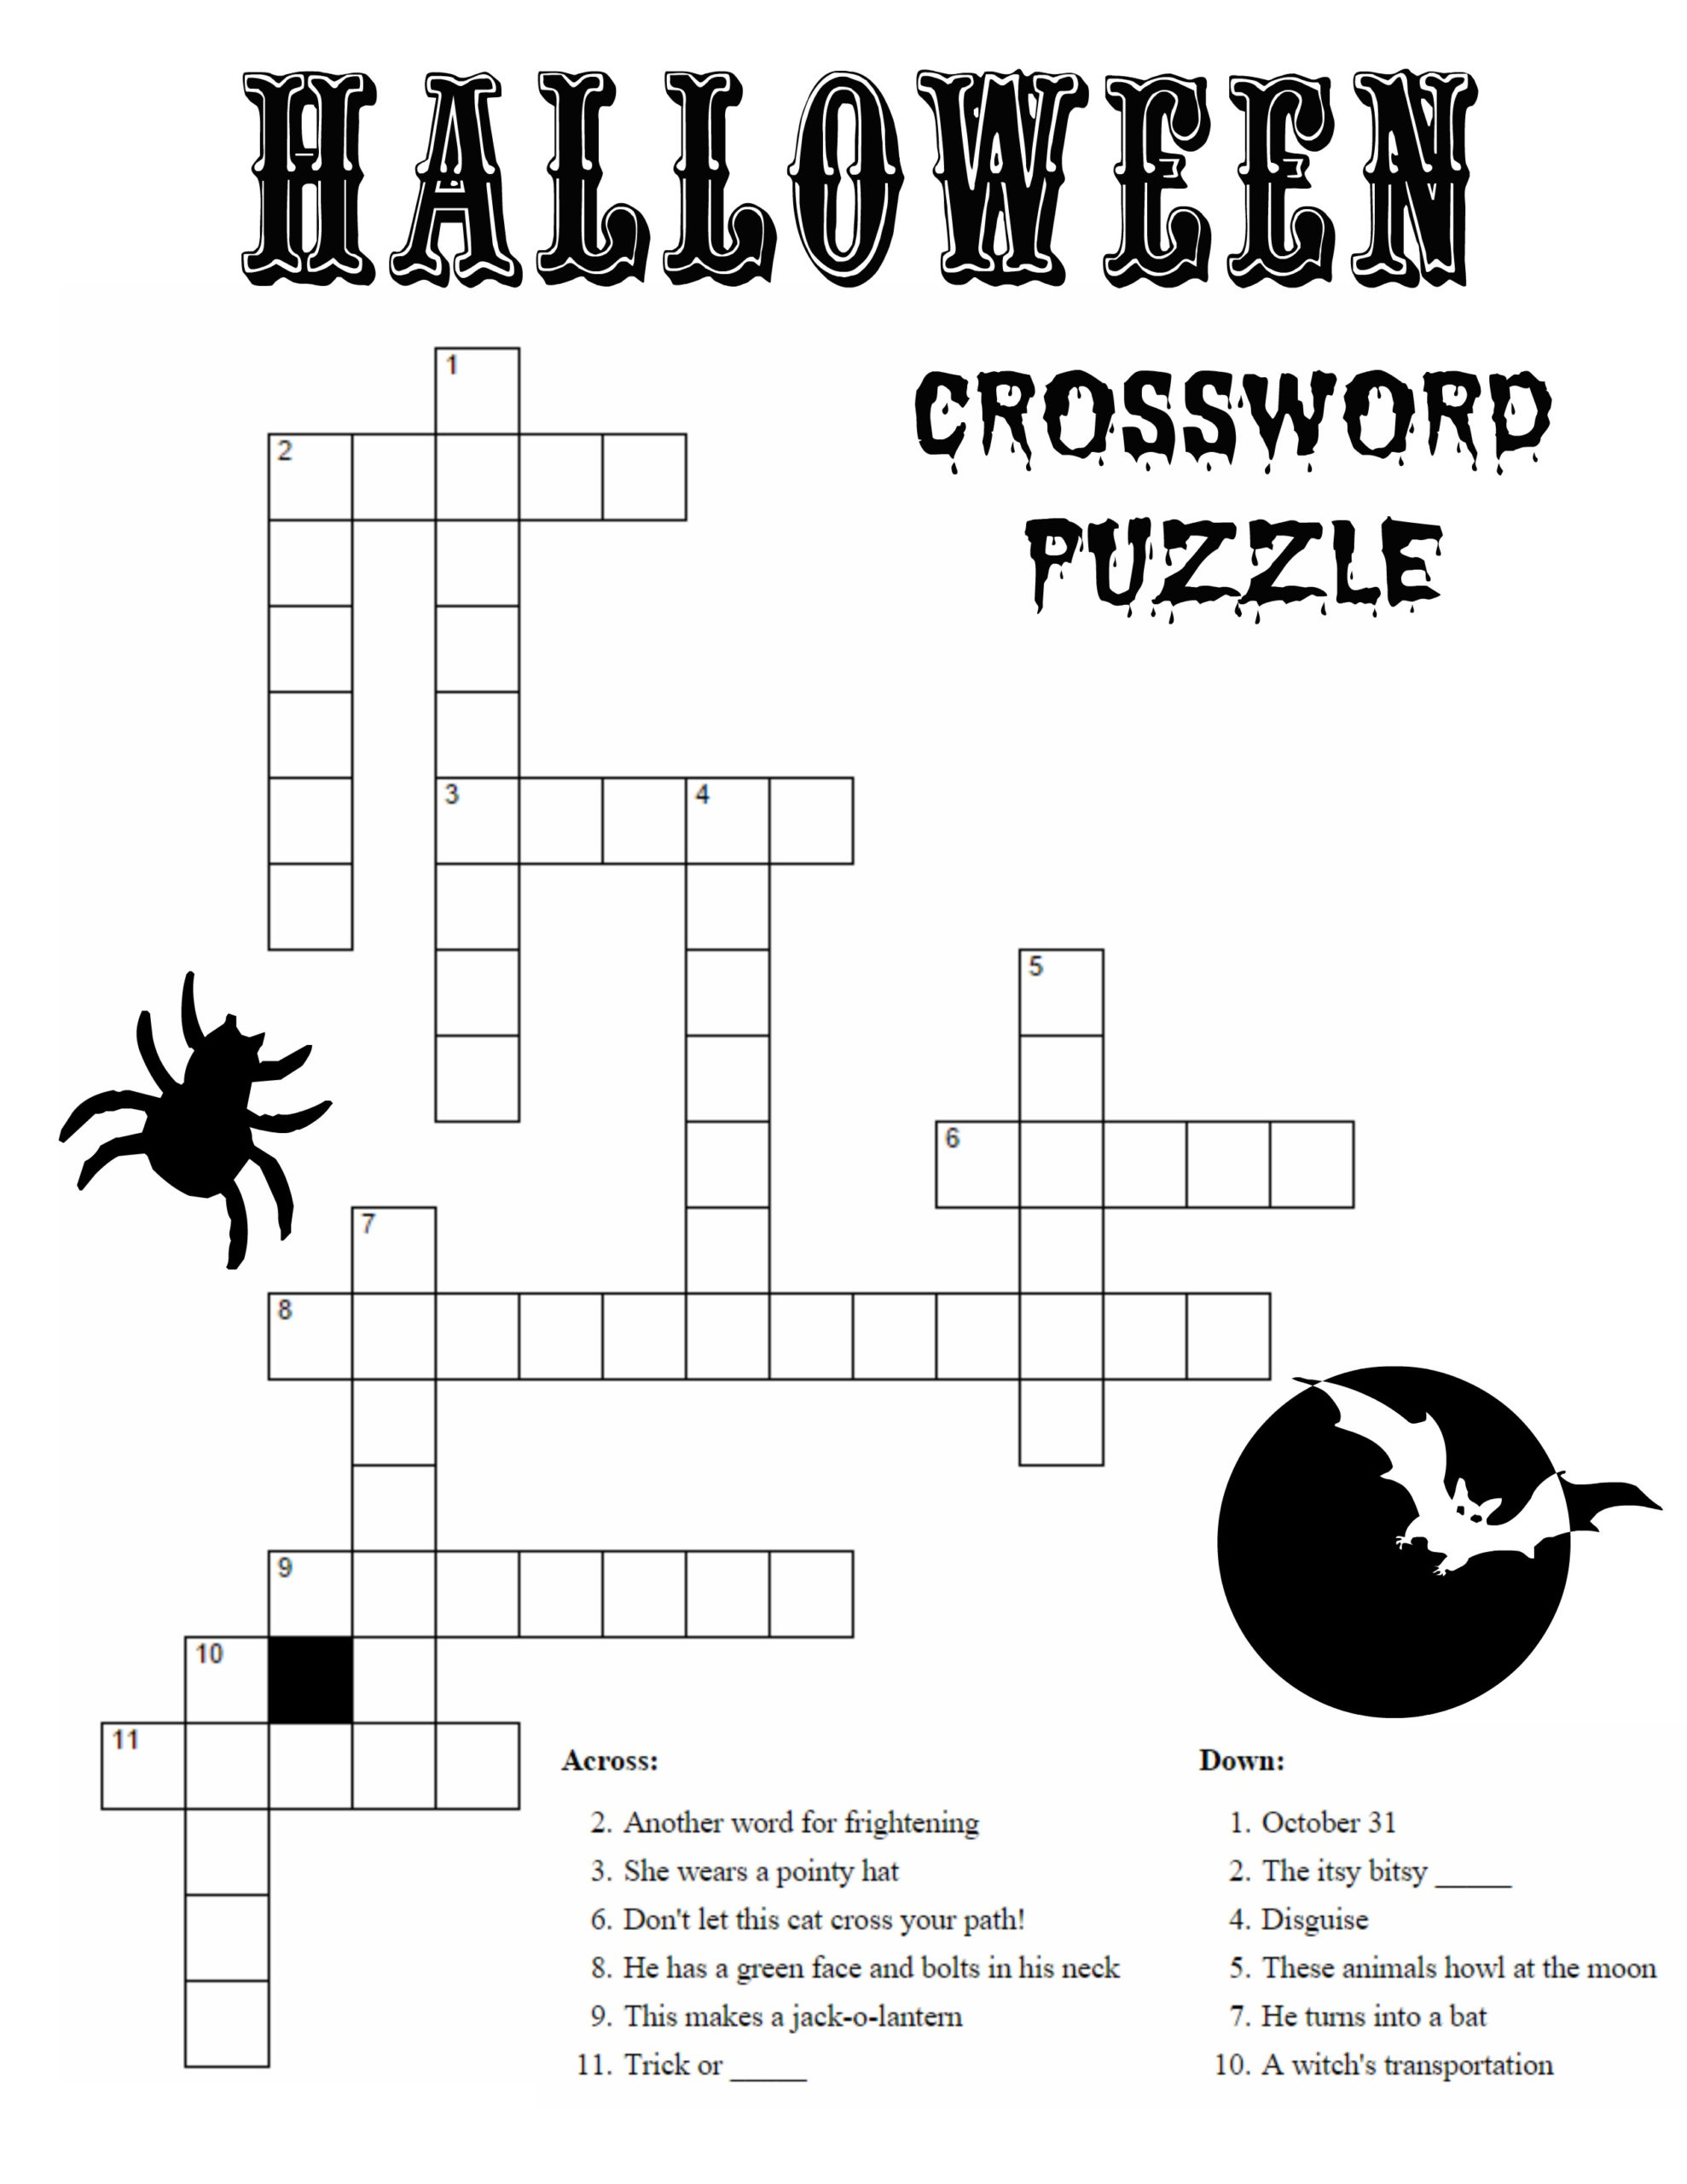 Halloween Crossword Puzzles For Adults